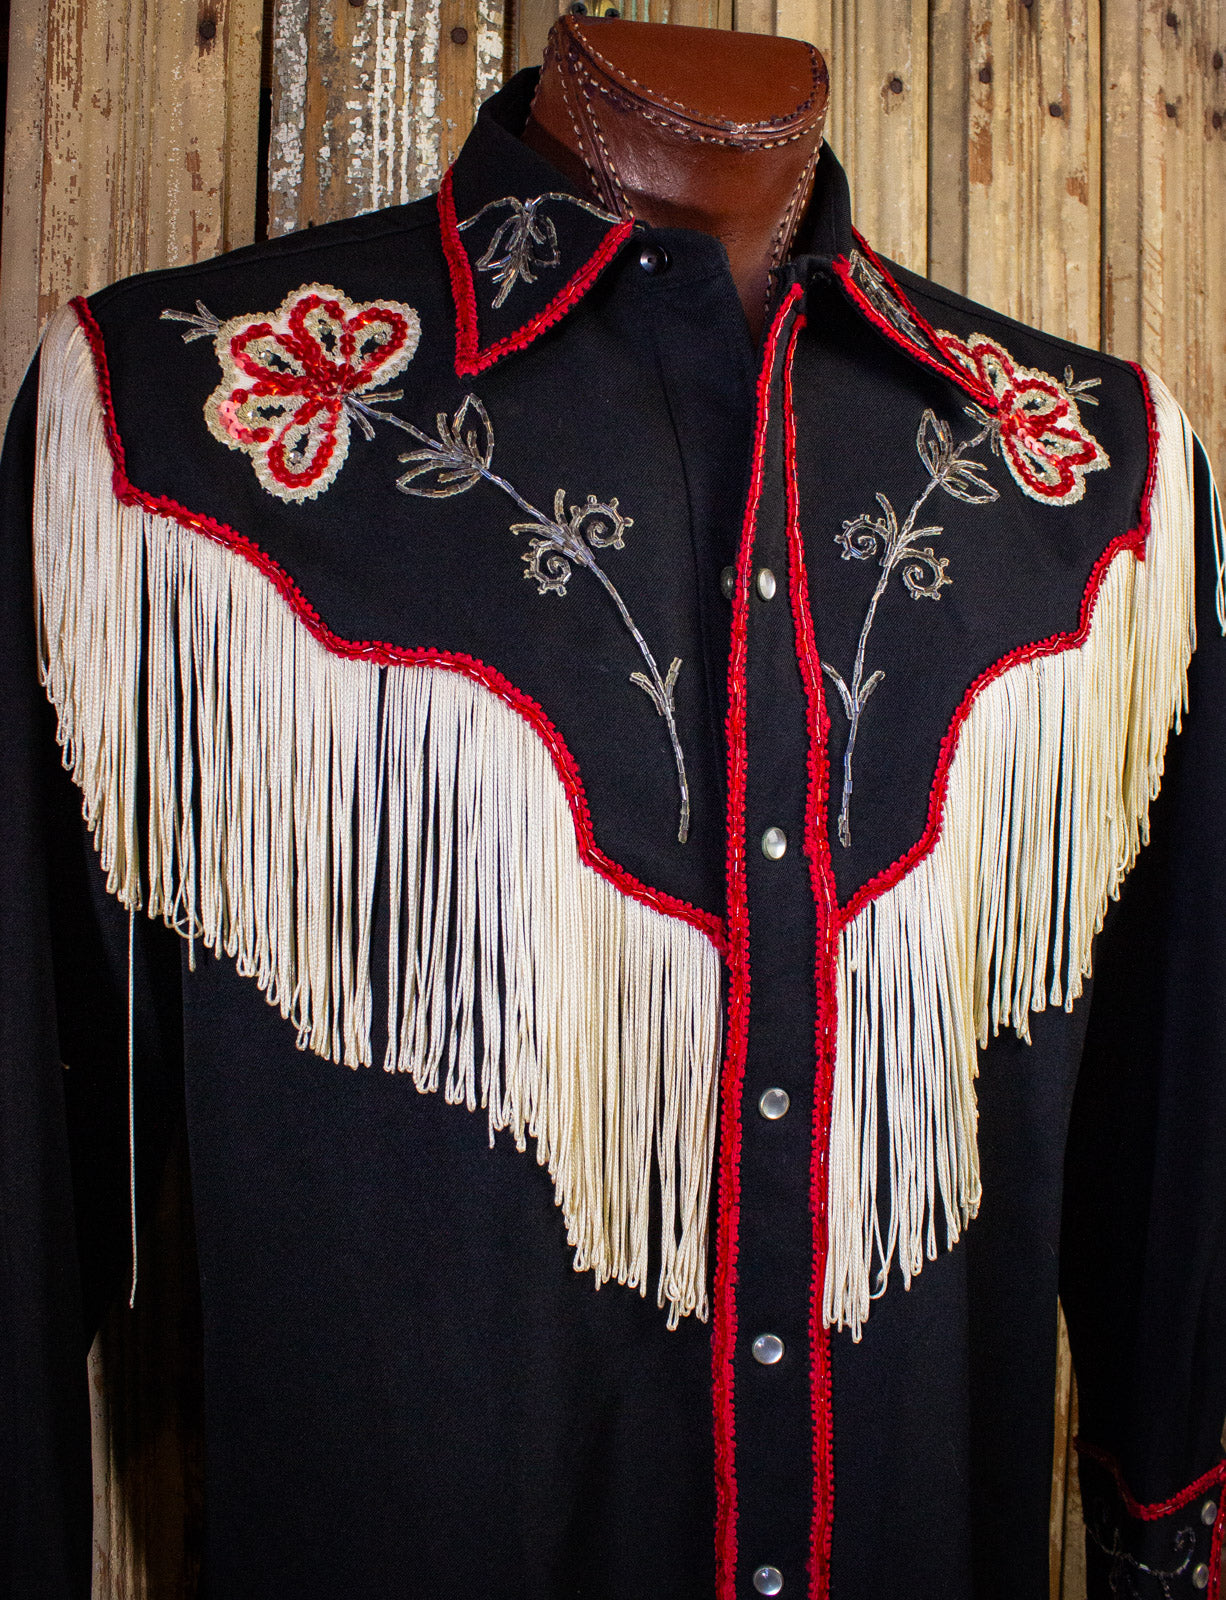 Vintage H Bar C Black Pearl Snap Western Shirt with Fringe and Sequins 60s XL